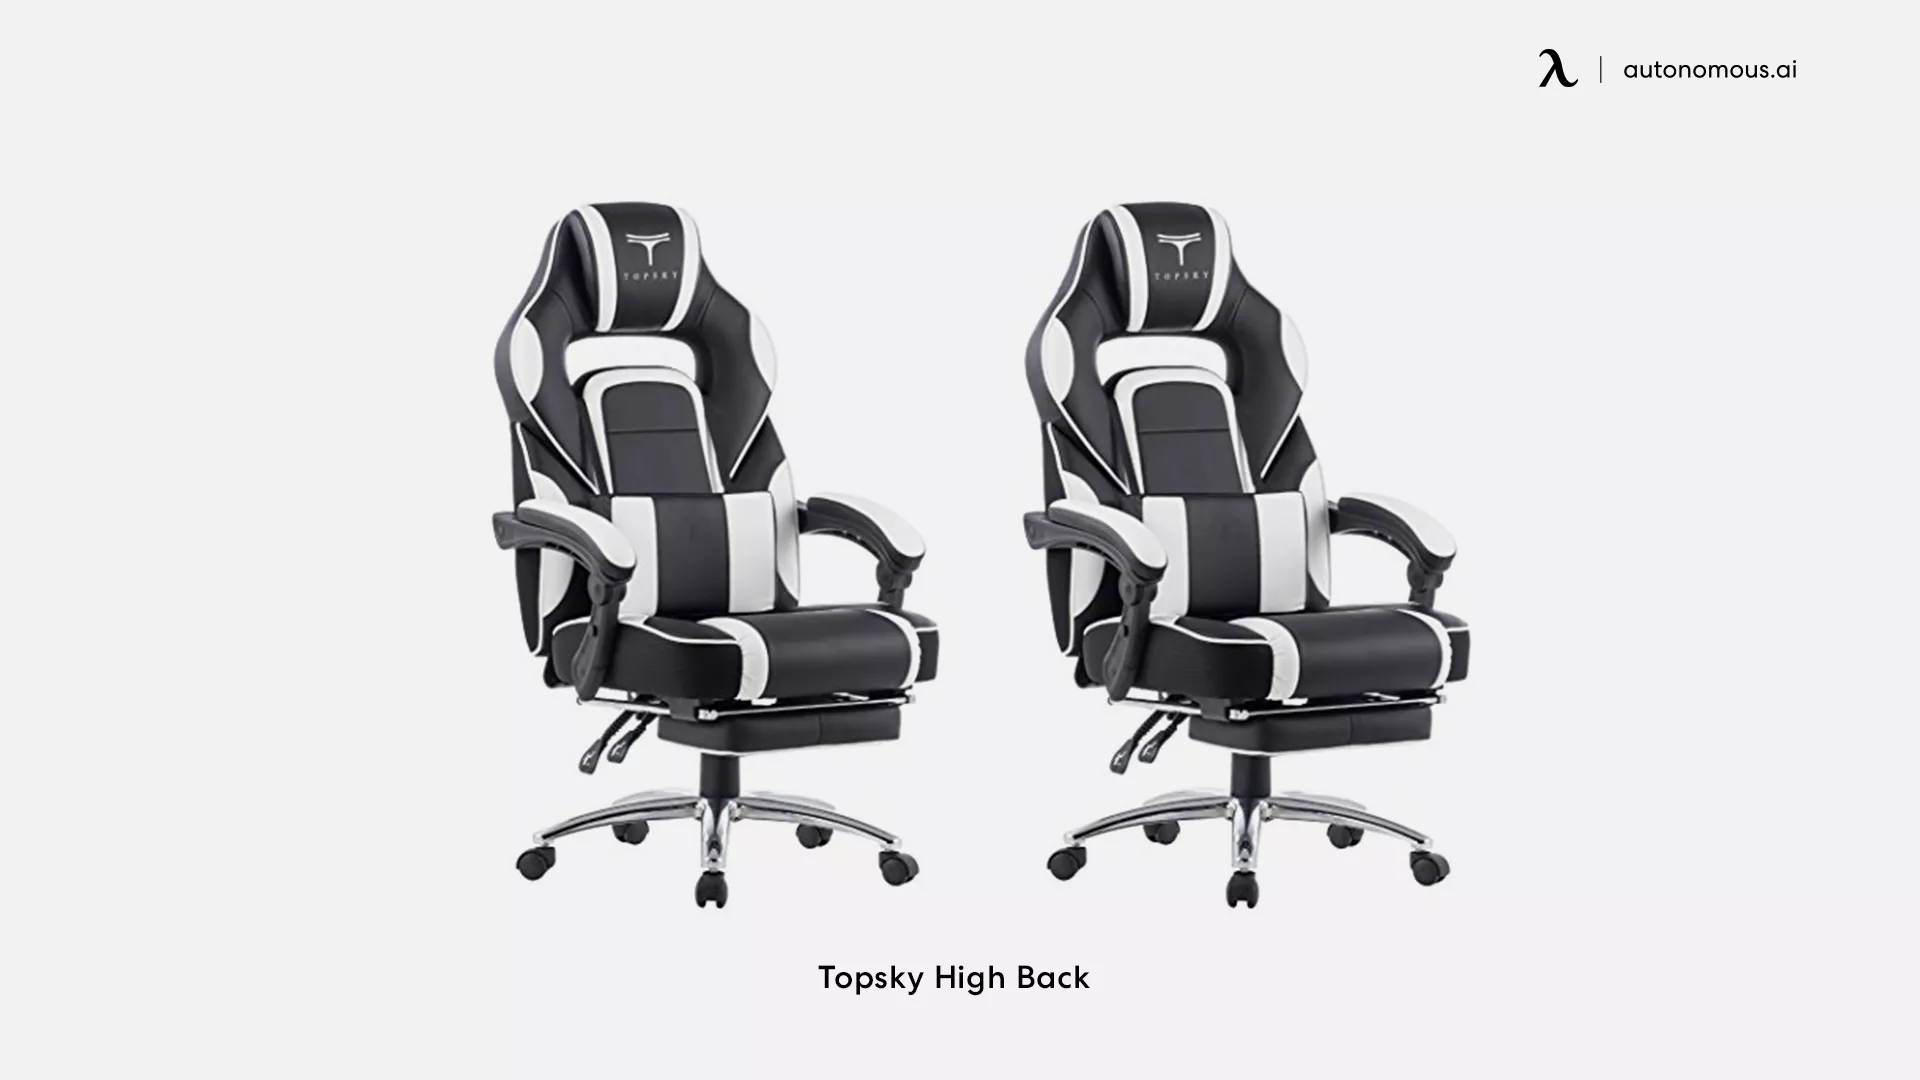 Topsky High Back white gaming chair